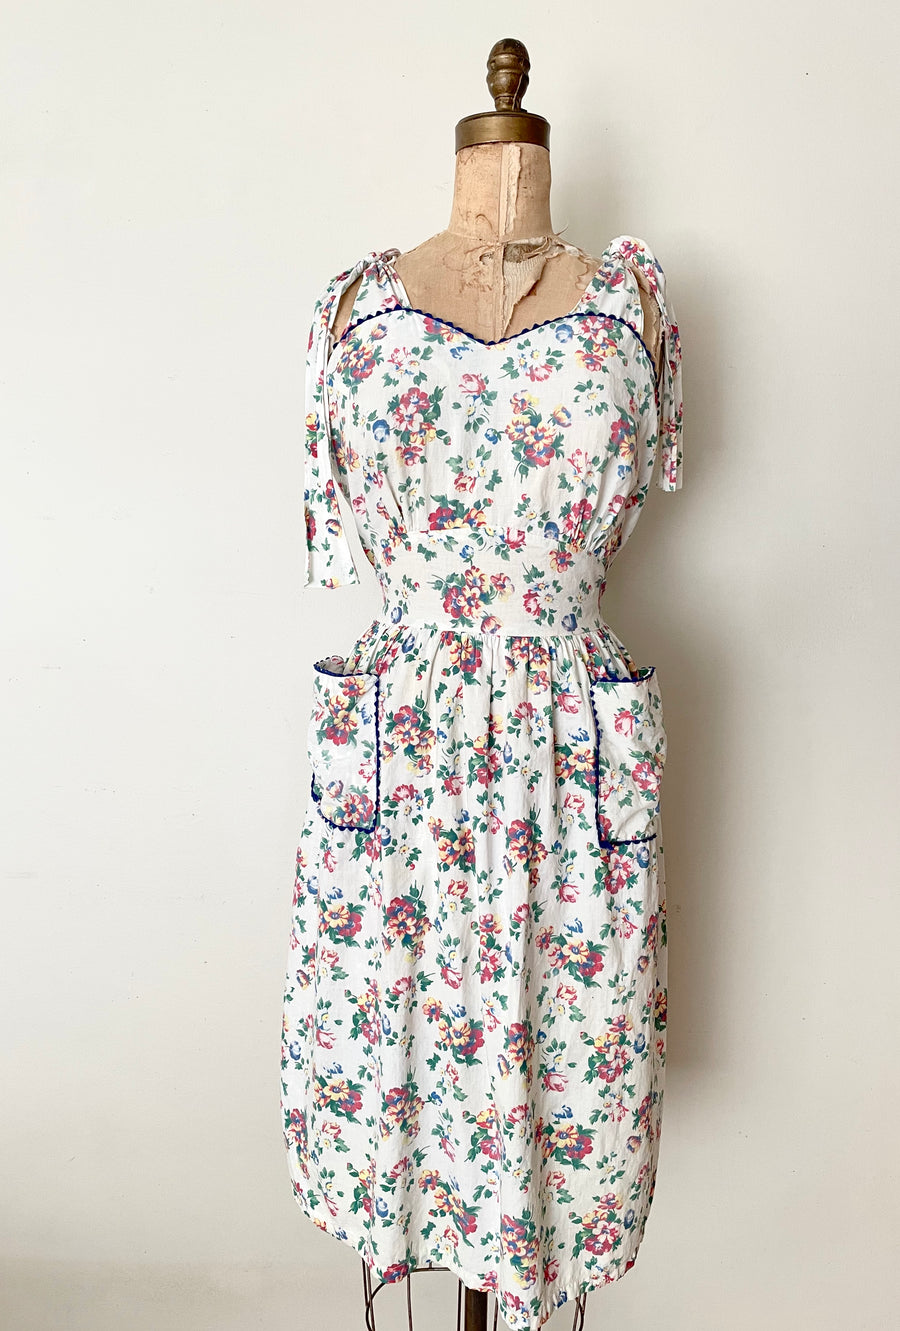 1940's Floral Sundress - Size M (slightly as-is)